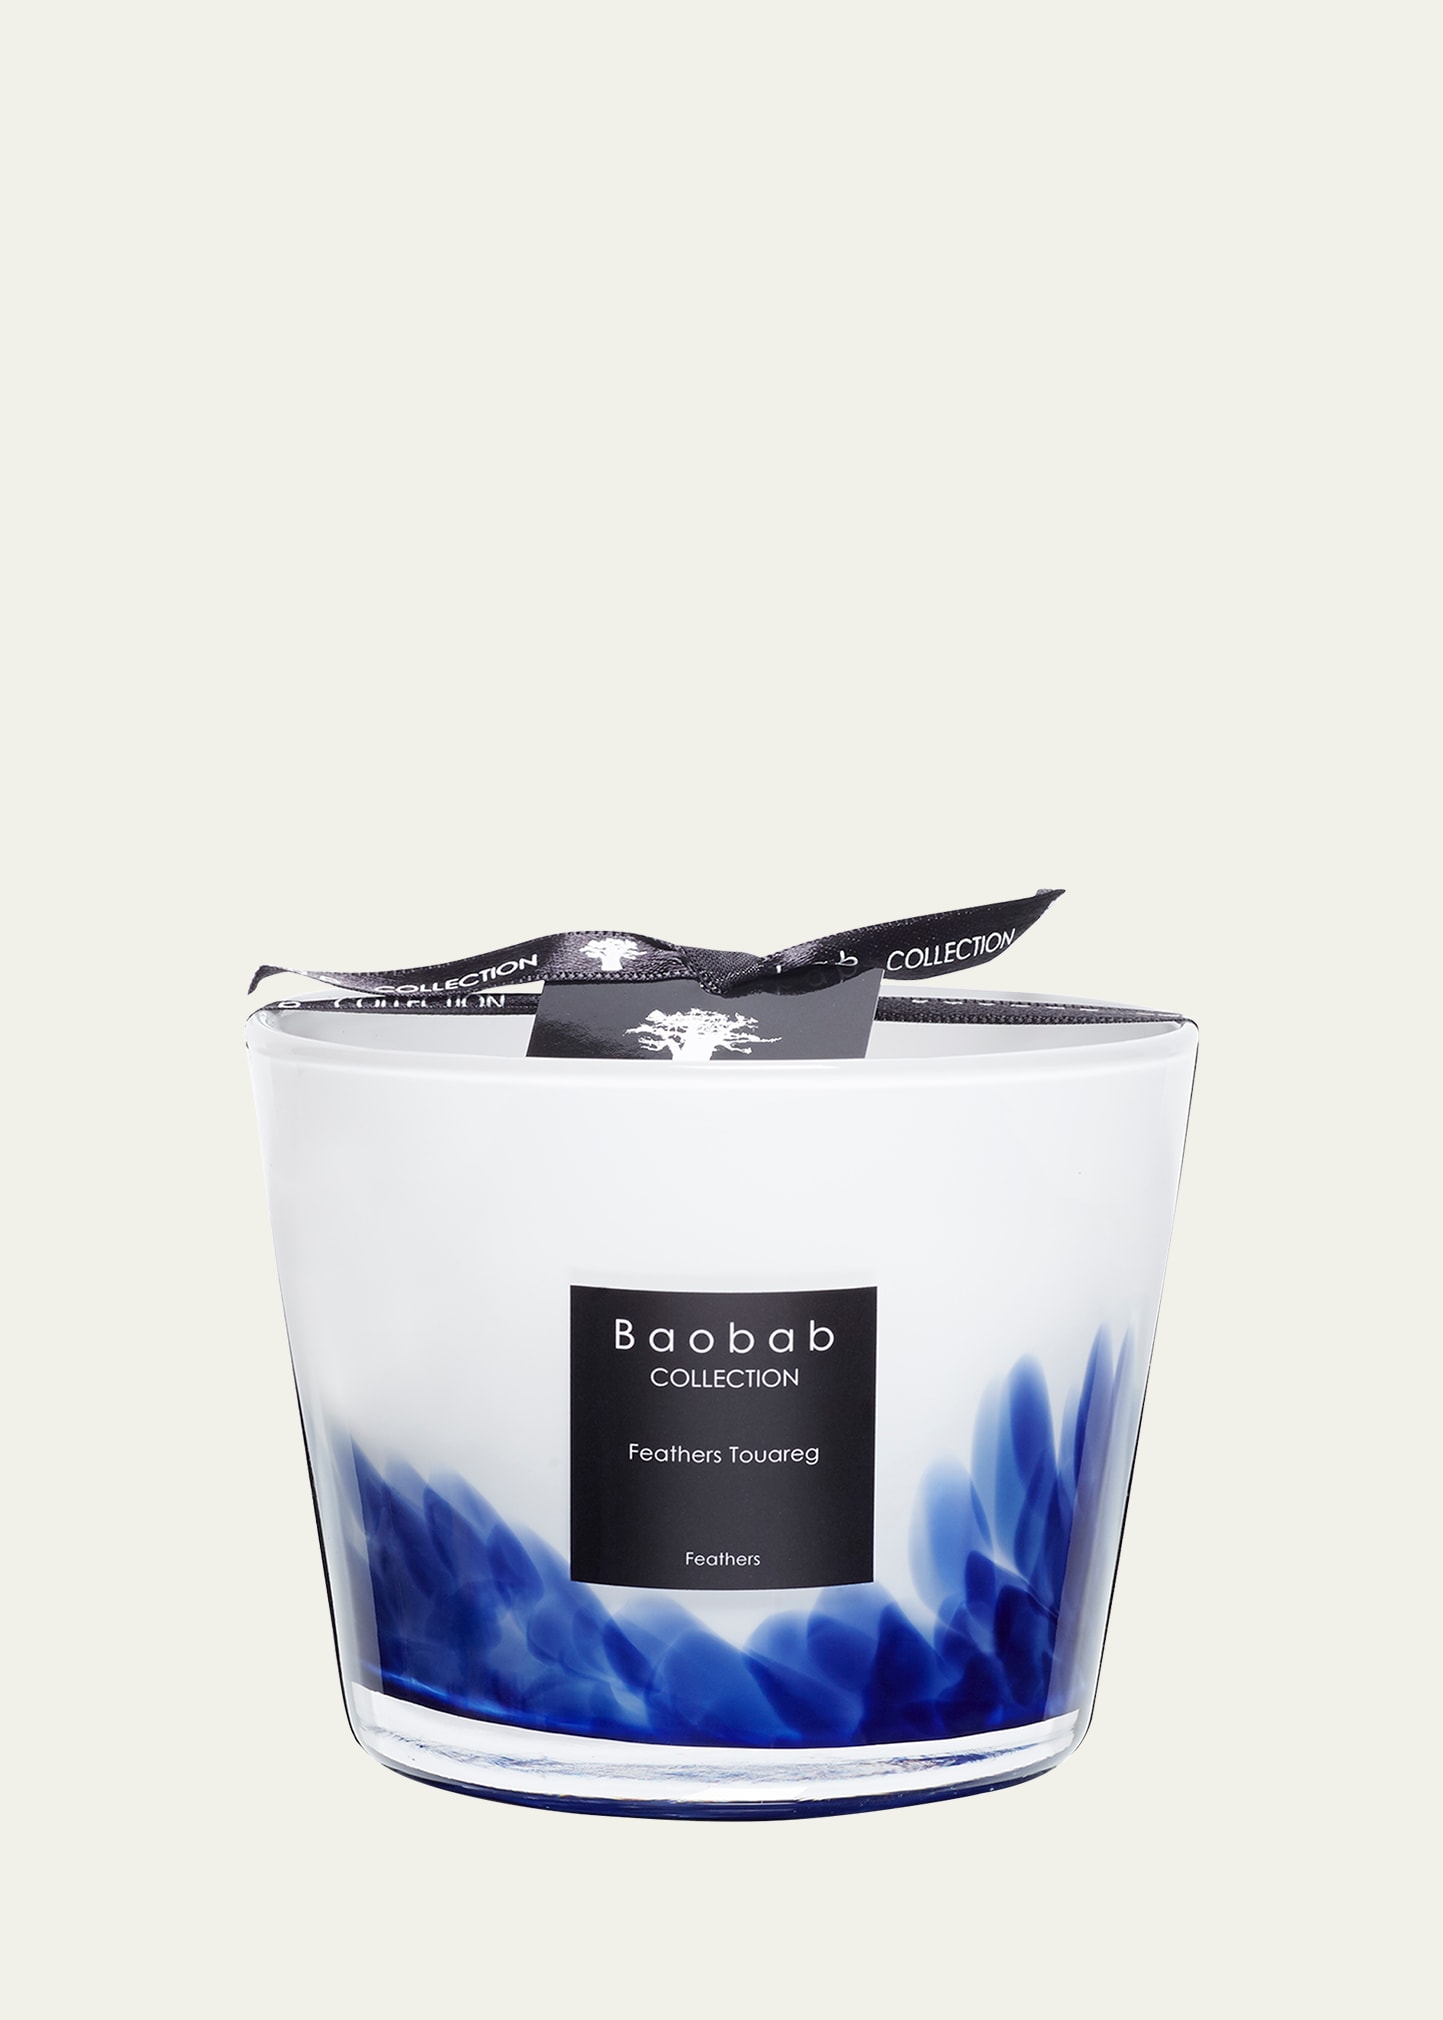 Baobab Collection Max 10 Feathers Touareg Scented Candle